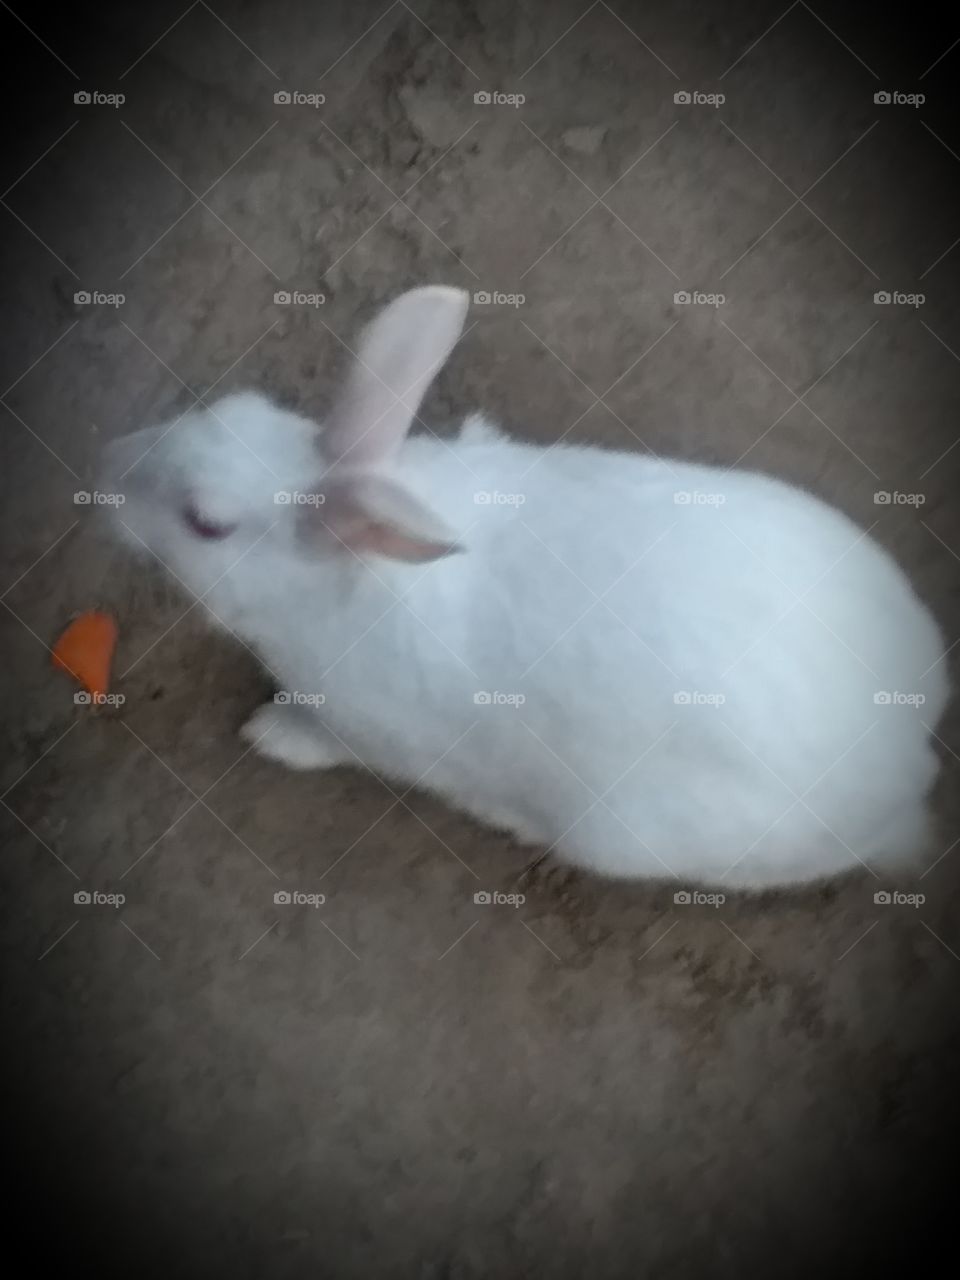 my beautifull Rabbit so awesome moment...